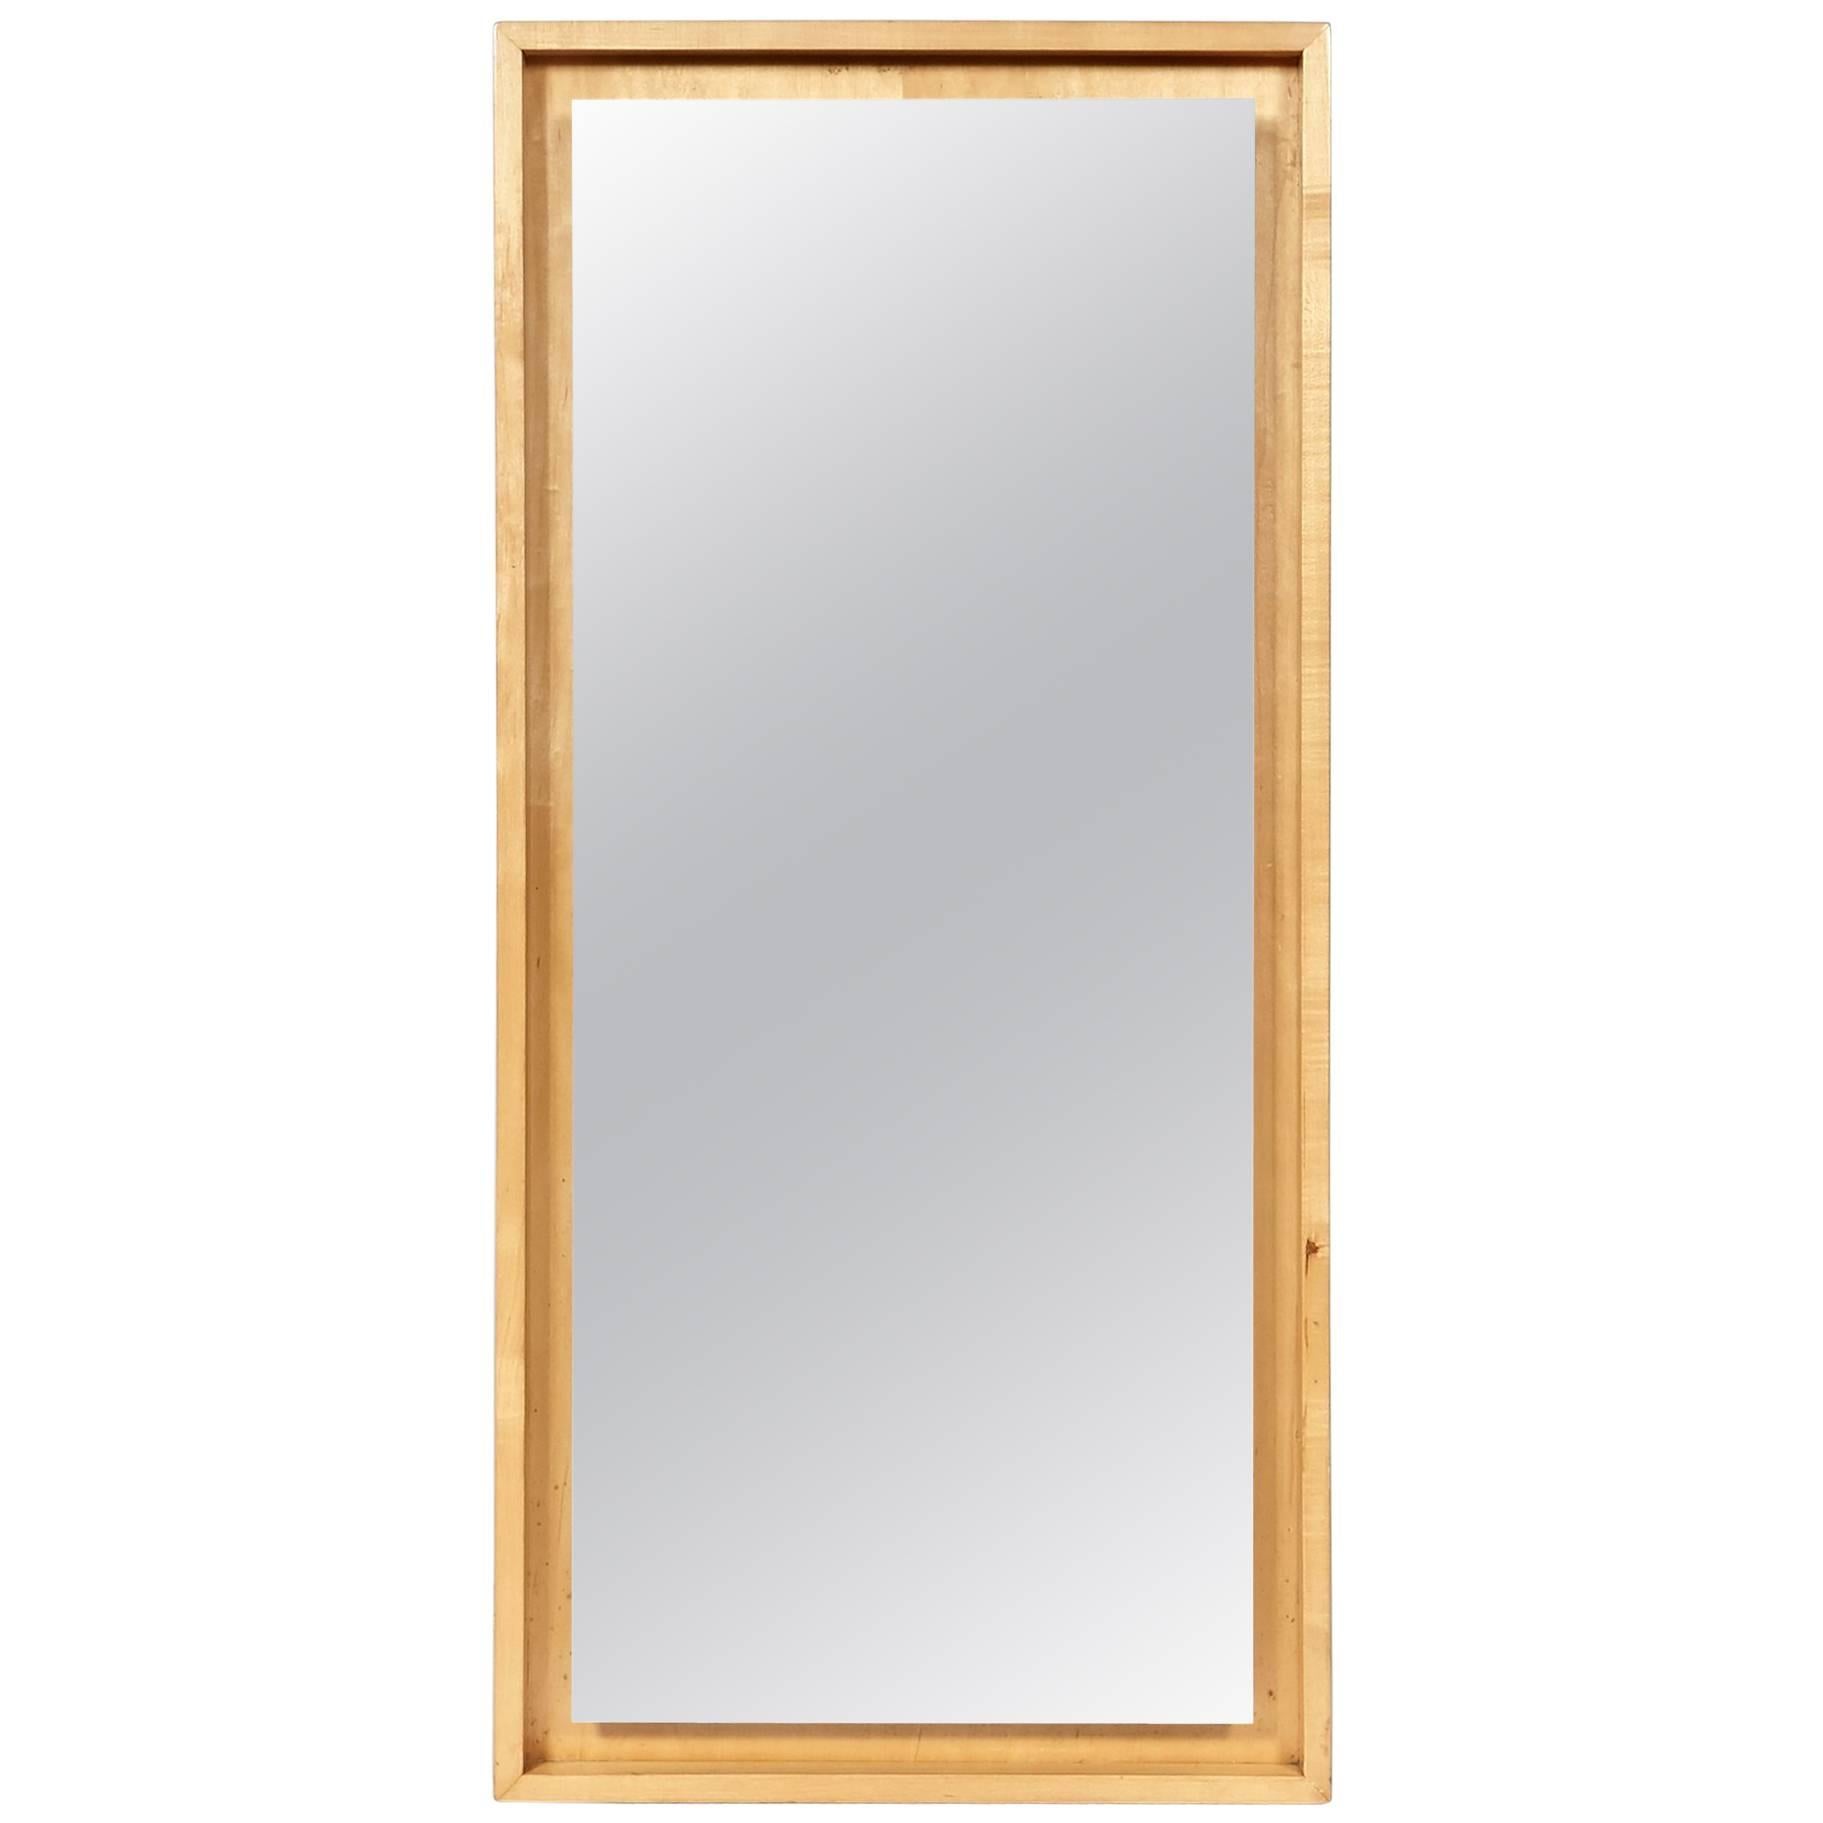 Mid-20th Century Inset Maple Wood Mirror Attributed to Conant Ball For Sale